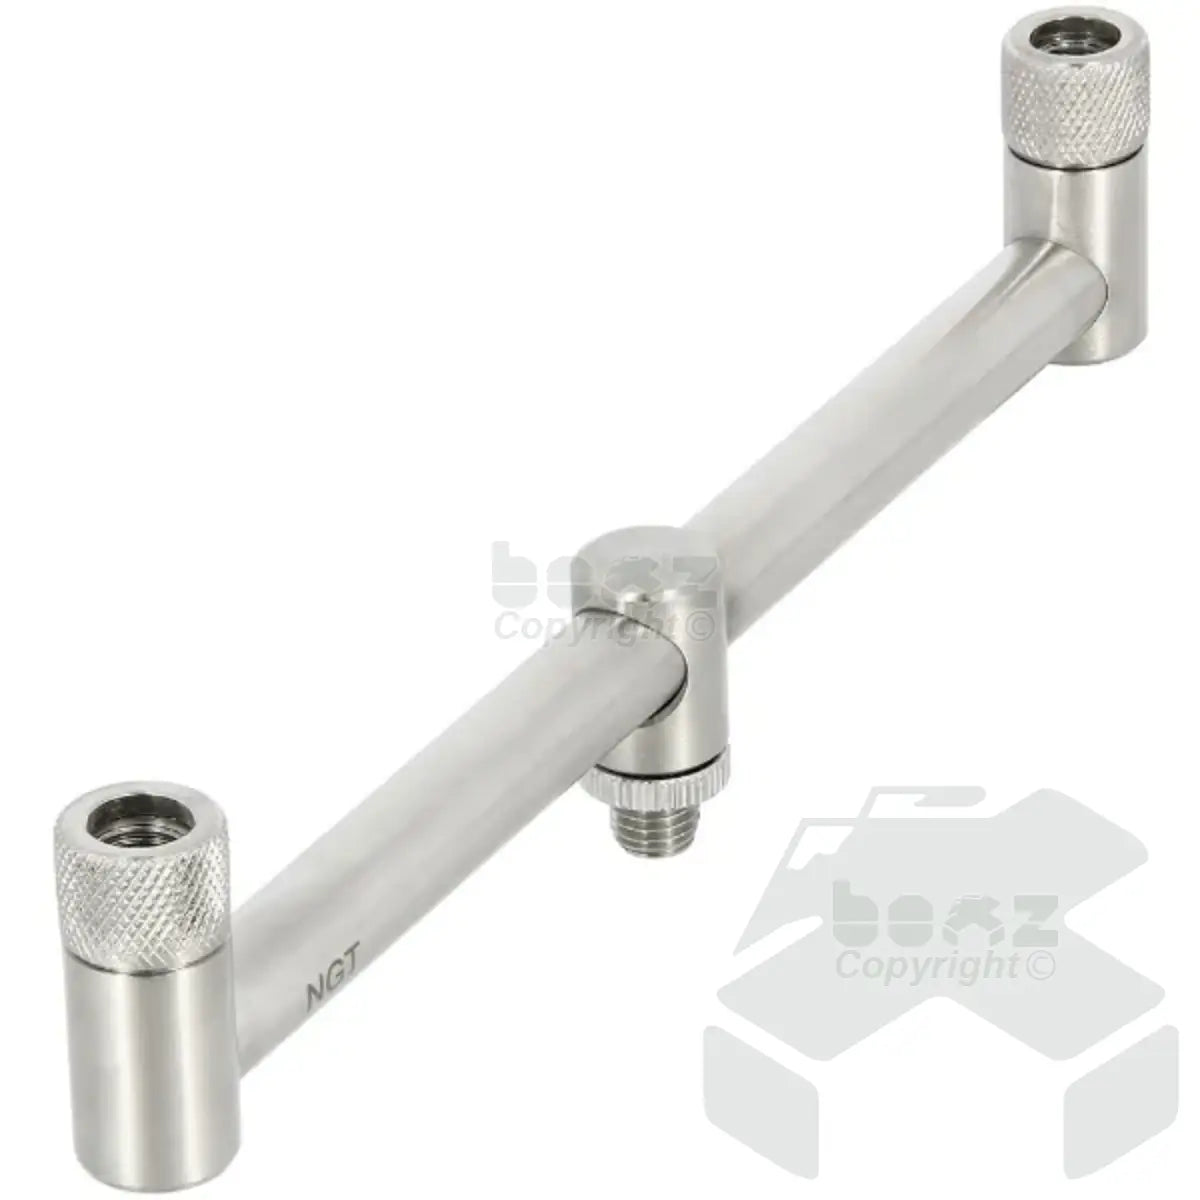 NGT Stainless Steel Buzz Bar - 2 Rod 20cm